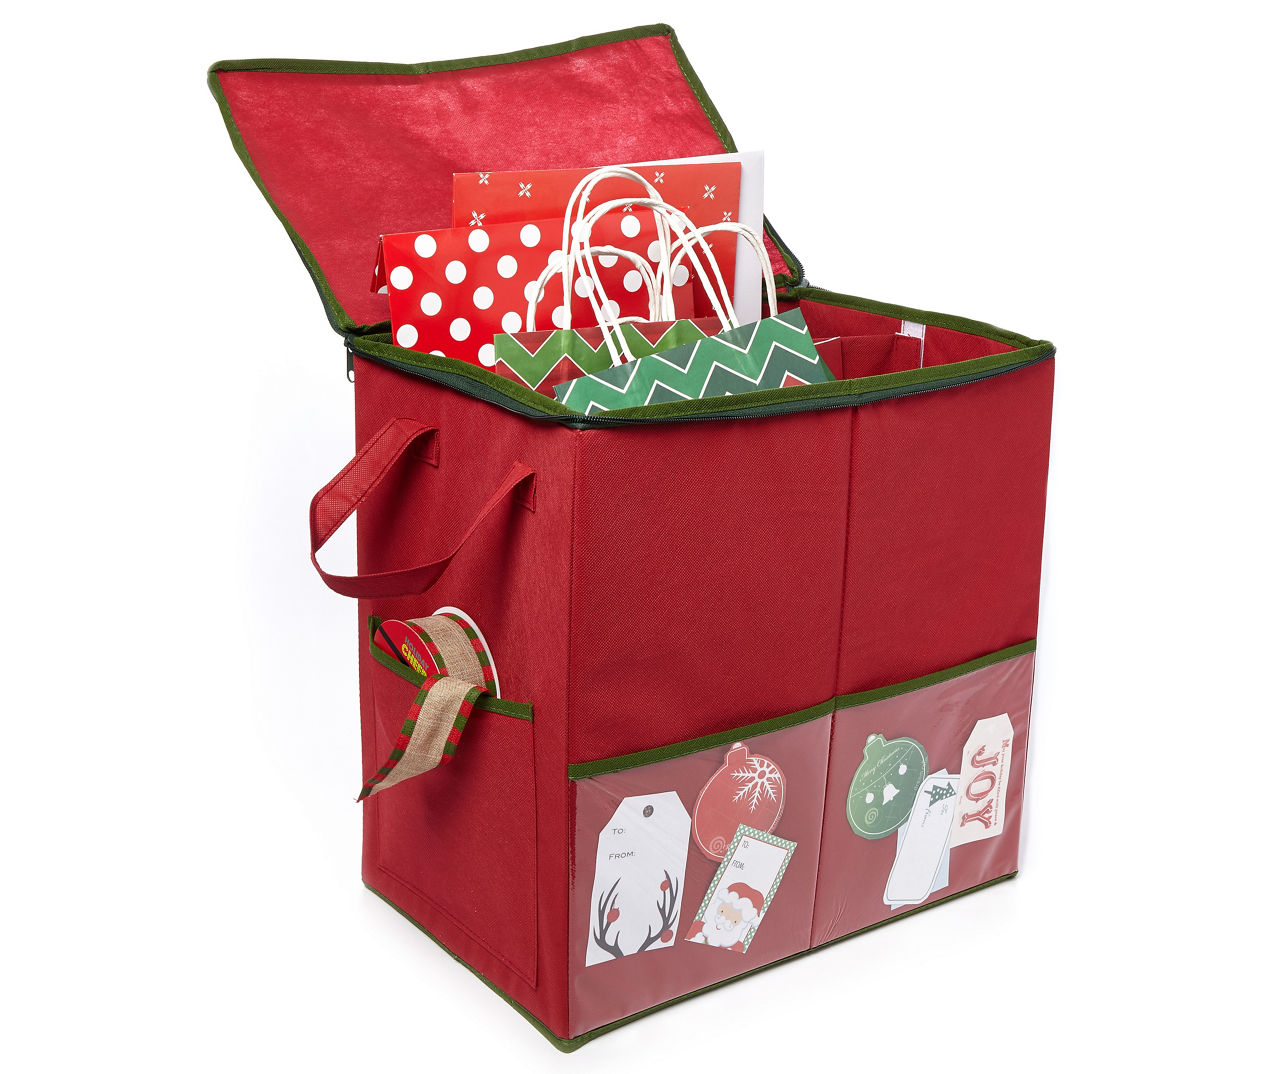 Gift Bag Organizer-20 Storage Tote With 4 Pockets For Wrap